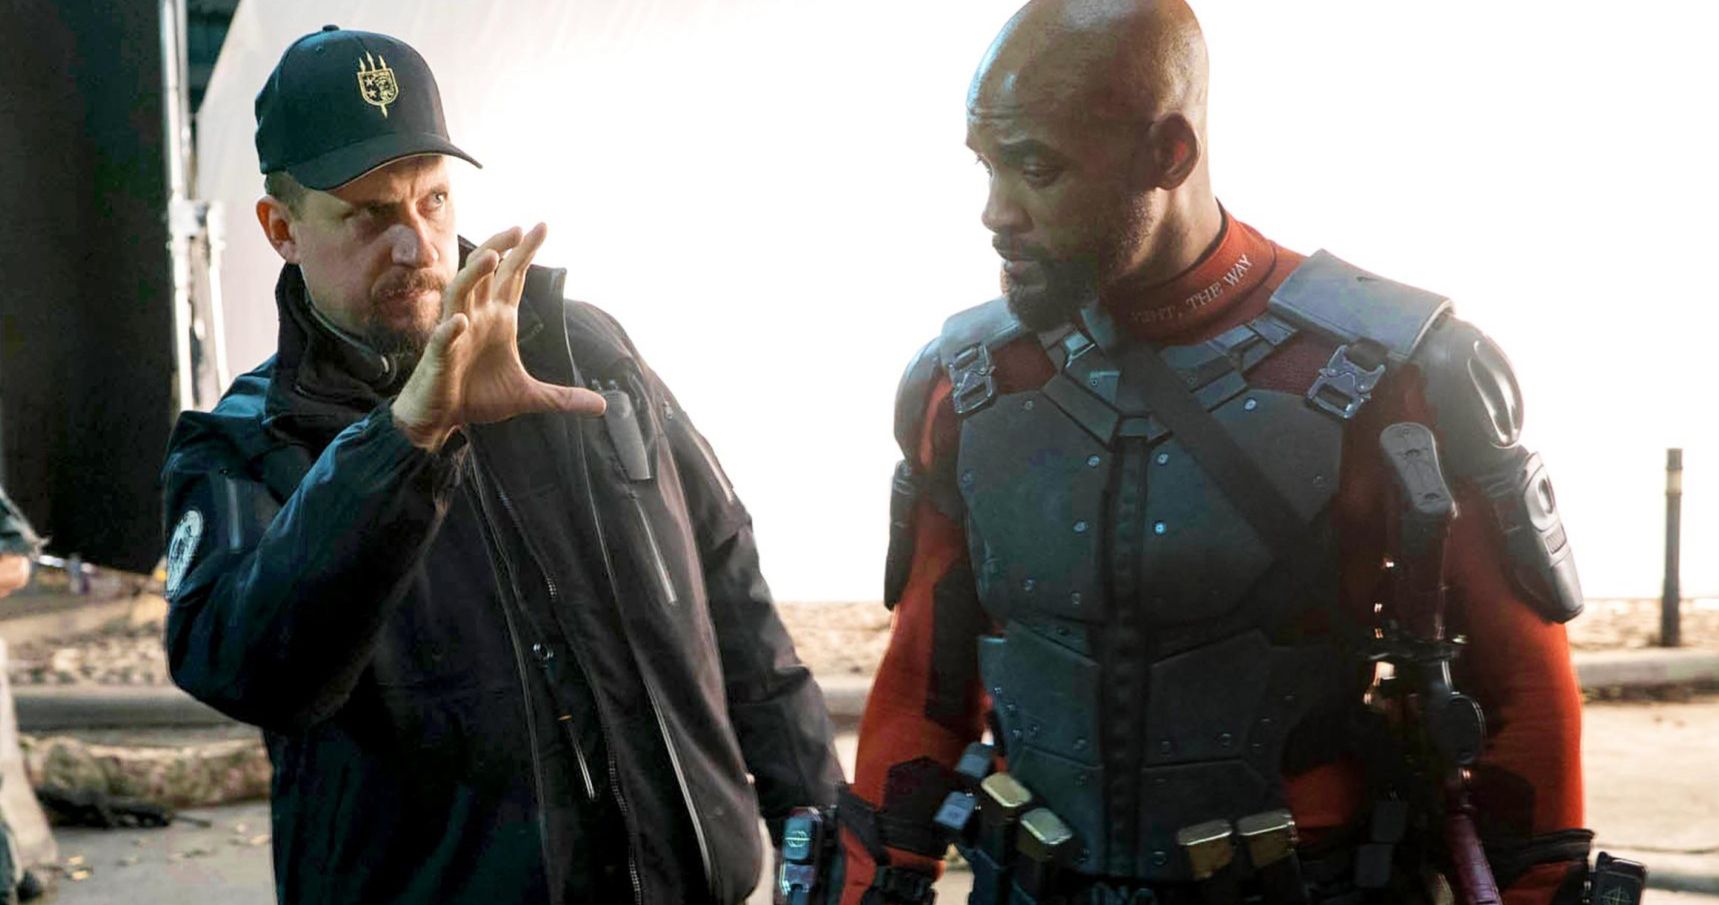 James Gunn Has Nothing But Praise for David Ayer's Suicide Squad